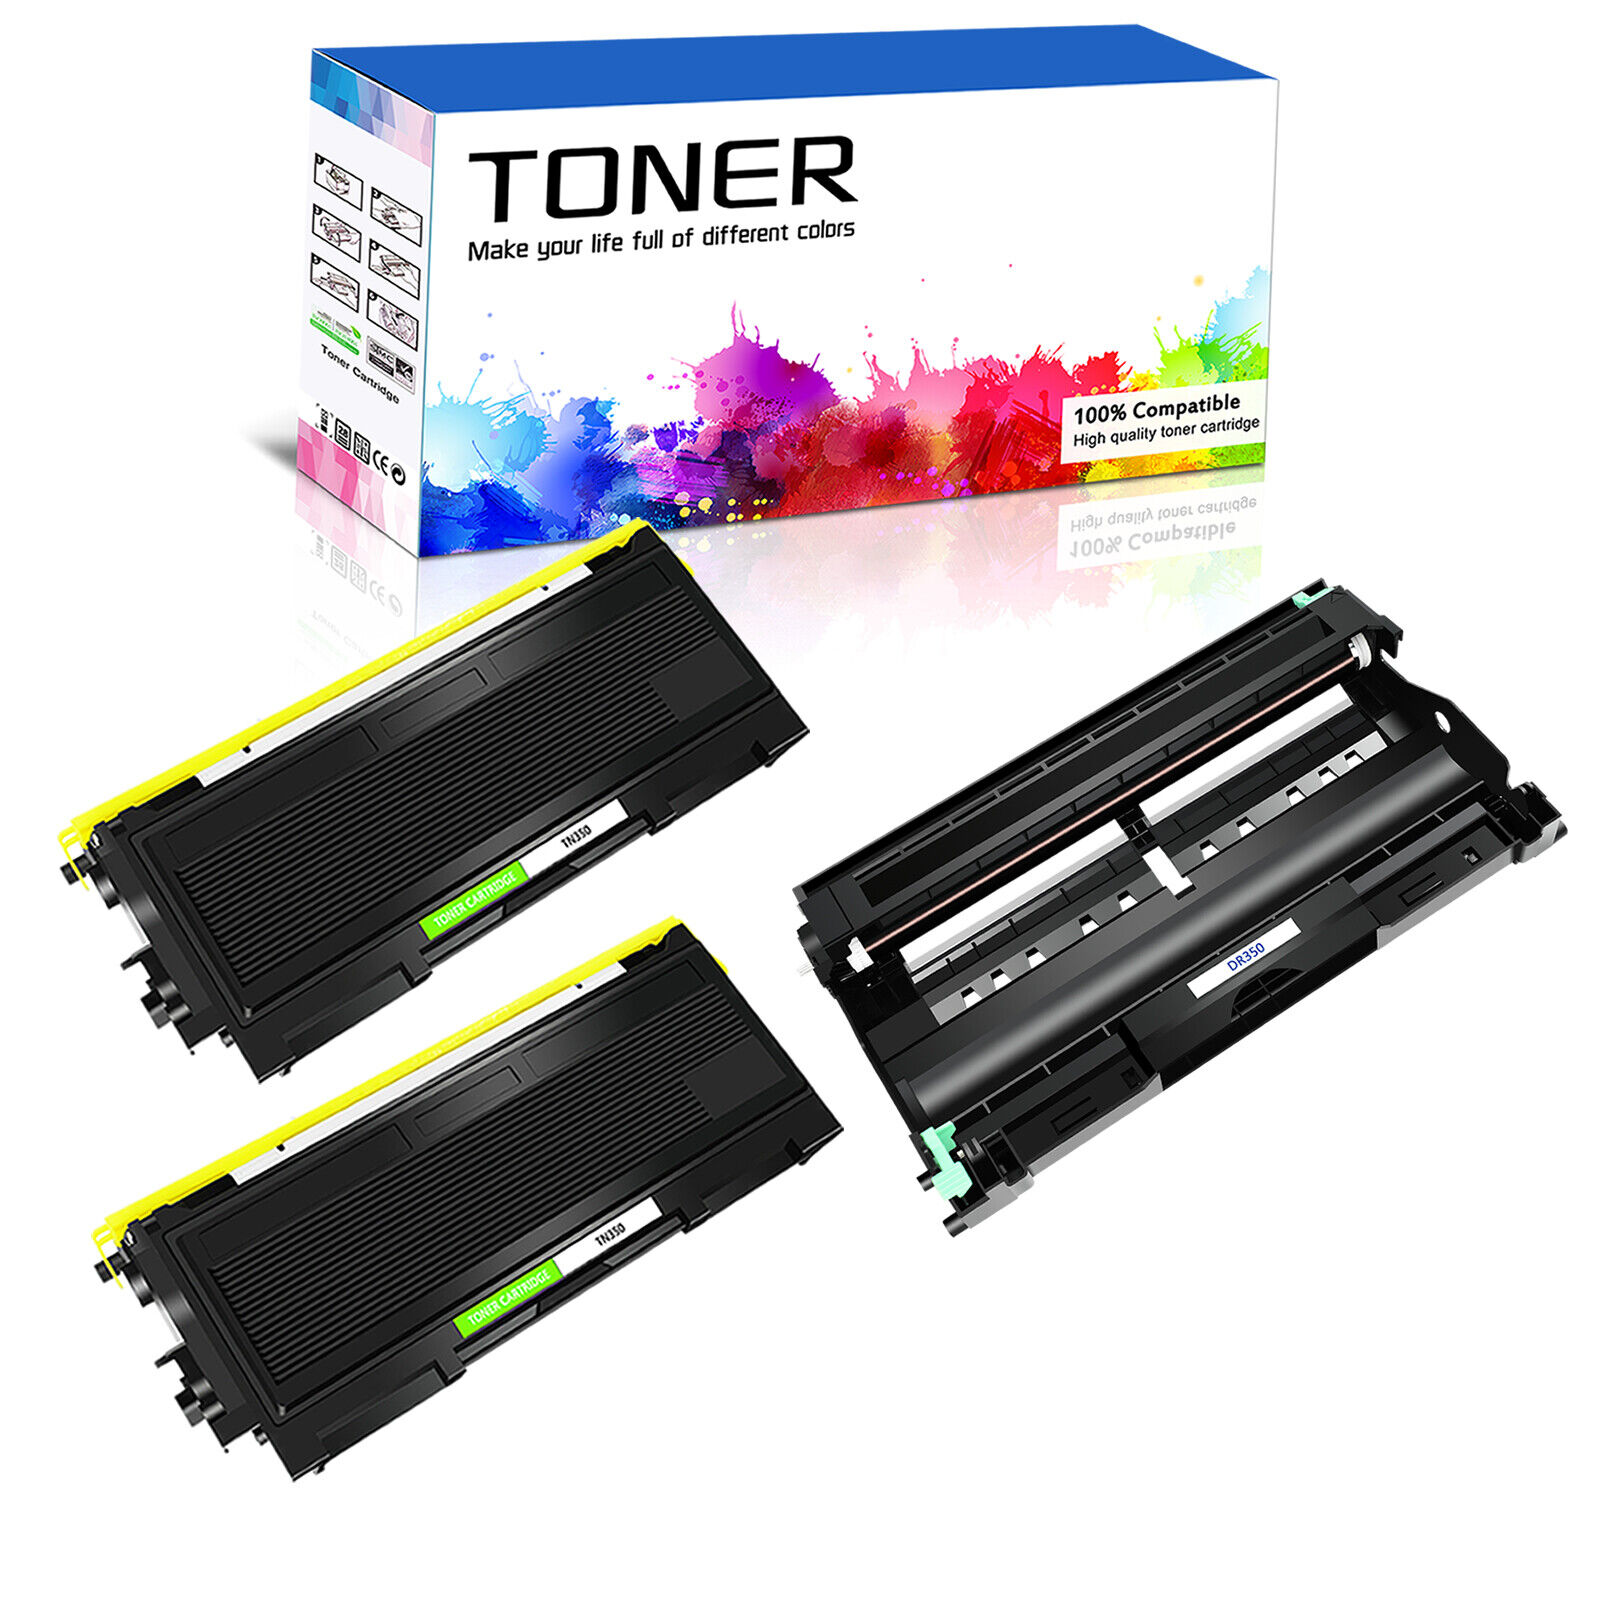 2PK TN350 Toner +1PK DR350 Drum Unit For Brother Intellifax-2850 2910 MFC-7420